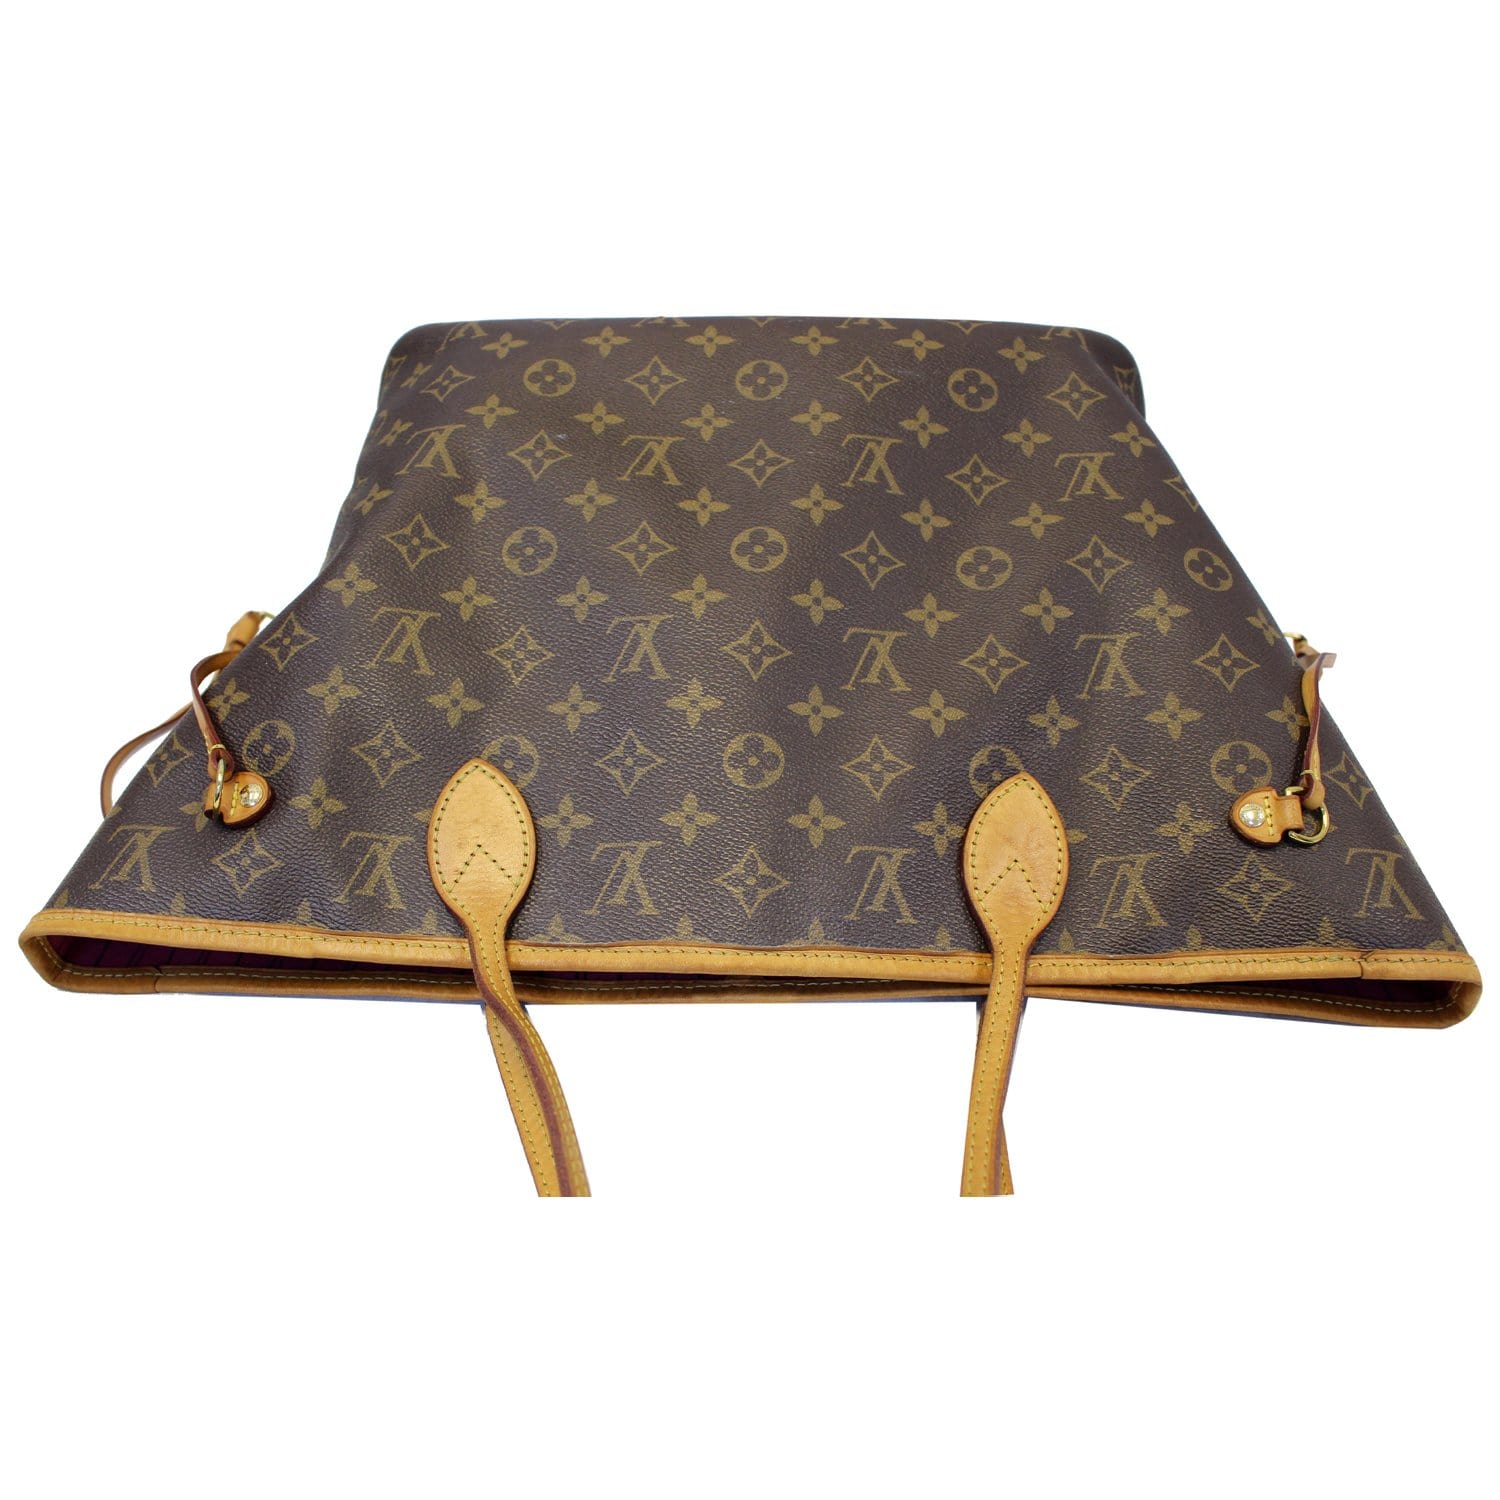 3 AMAZING OUTFITS THAT CAN BE WORN WITH THE BROWN LOUIS VUITTON NEVERFULL  MONOGRAM BAG